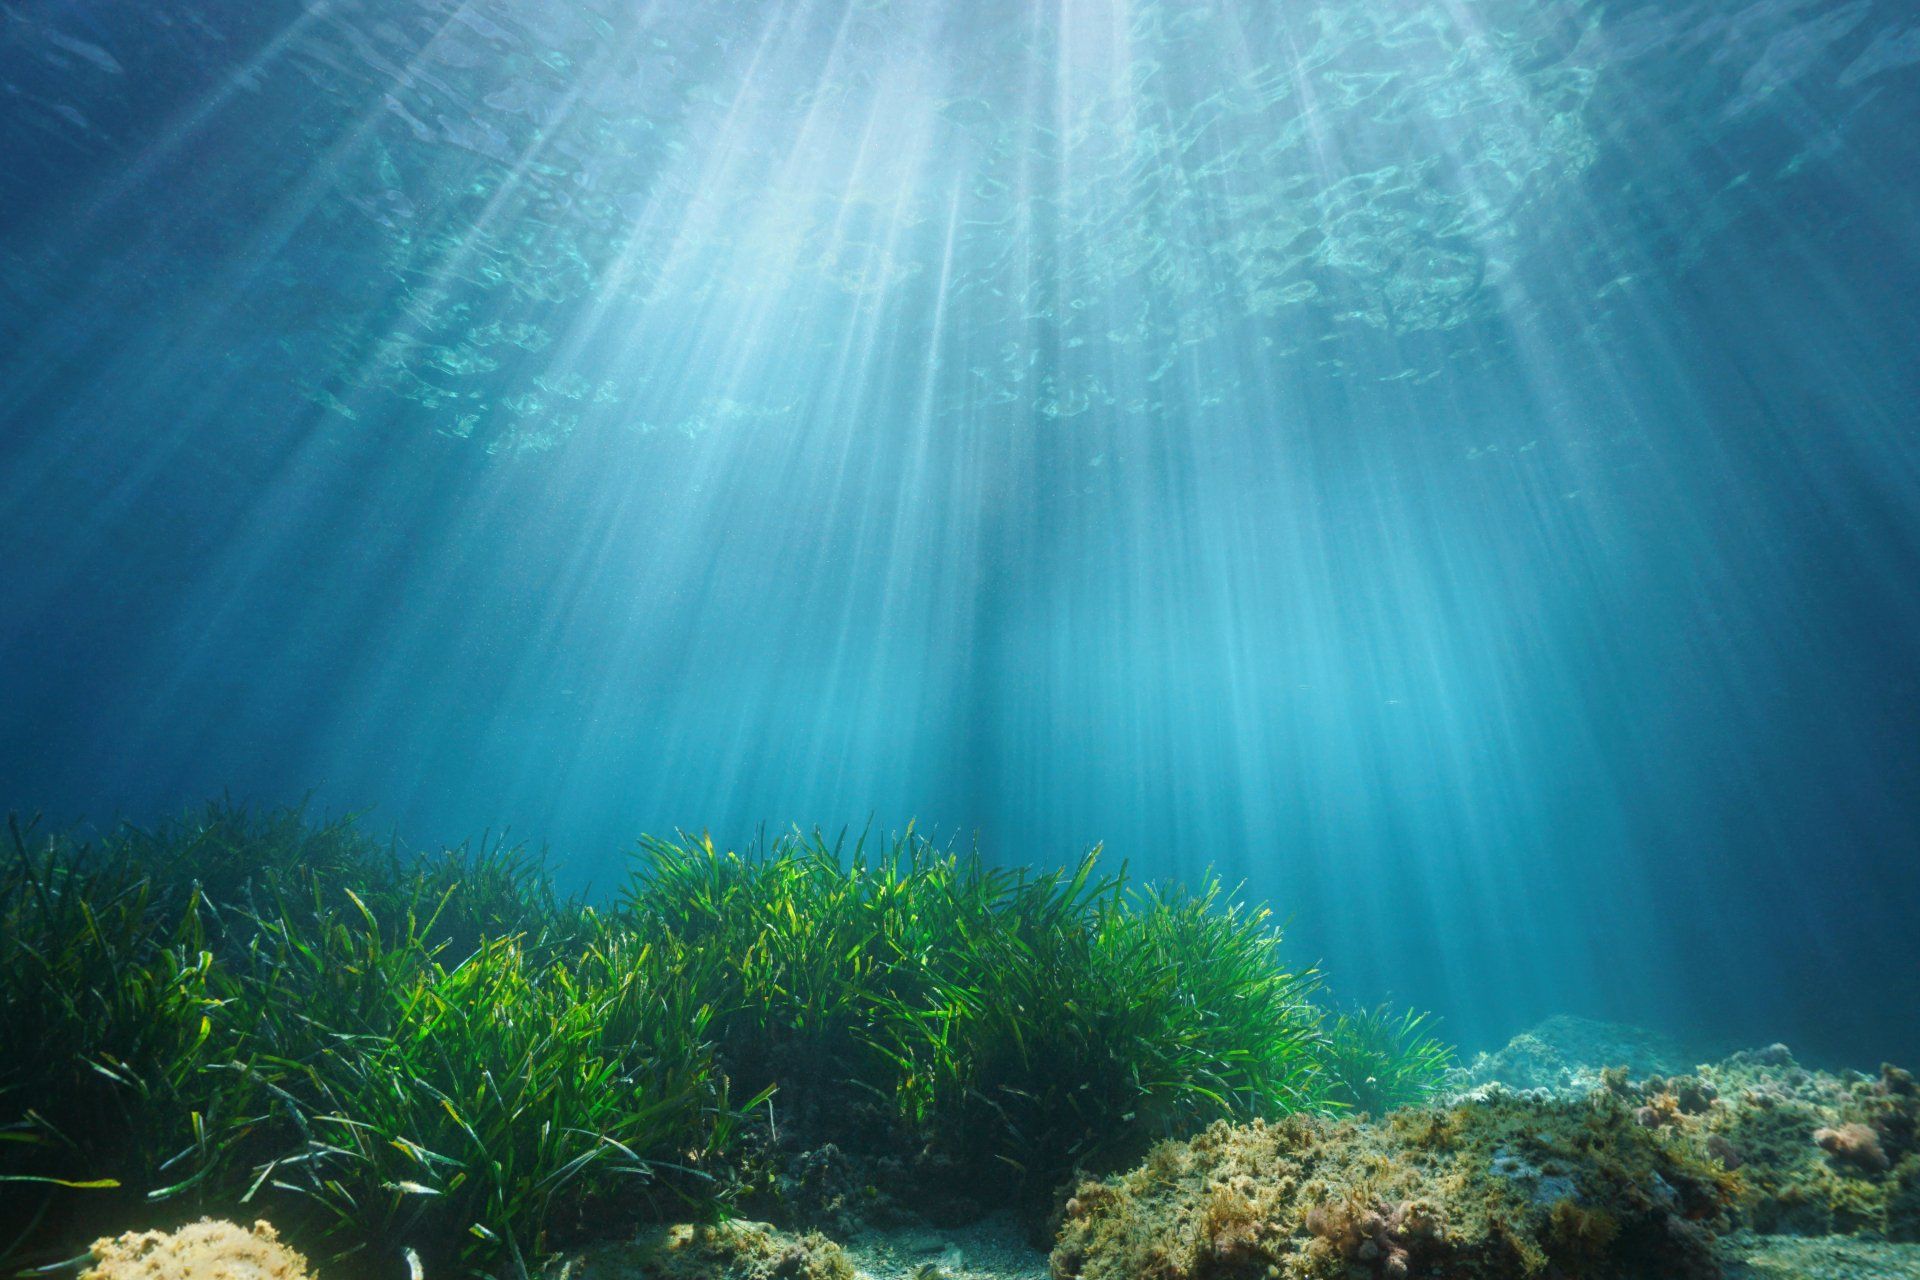 Why is Posidonia so important for the marine ecosystem?